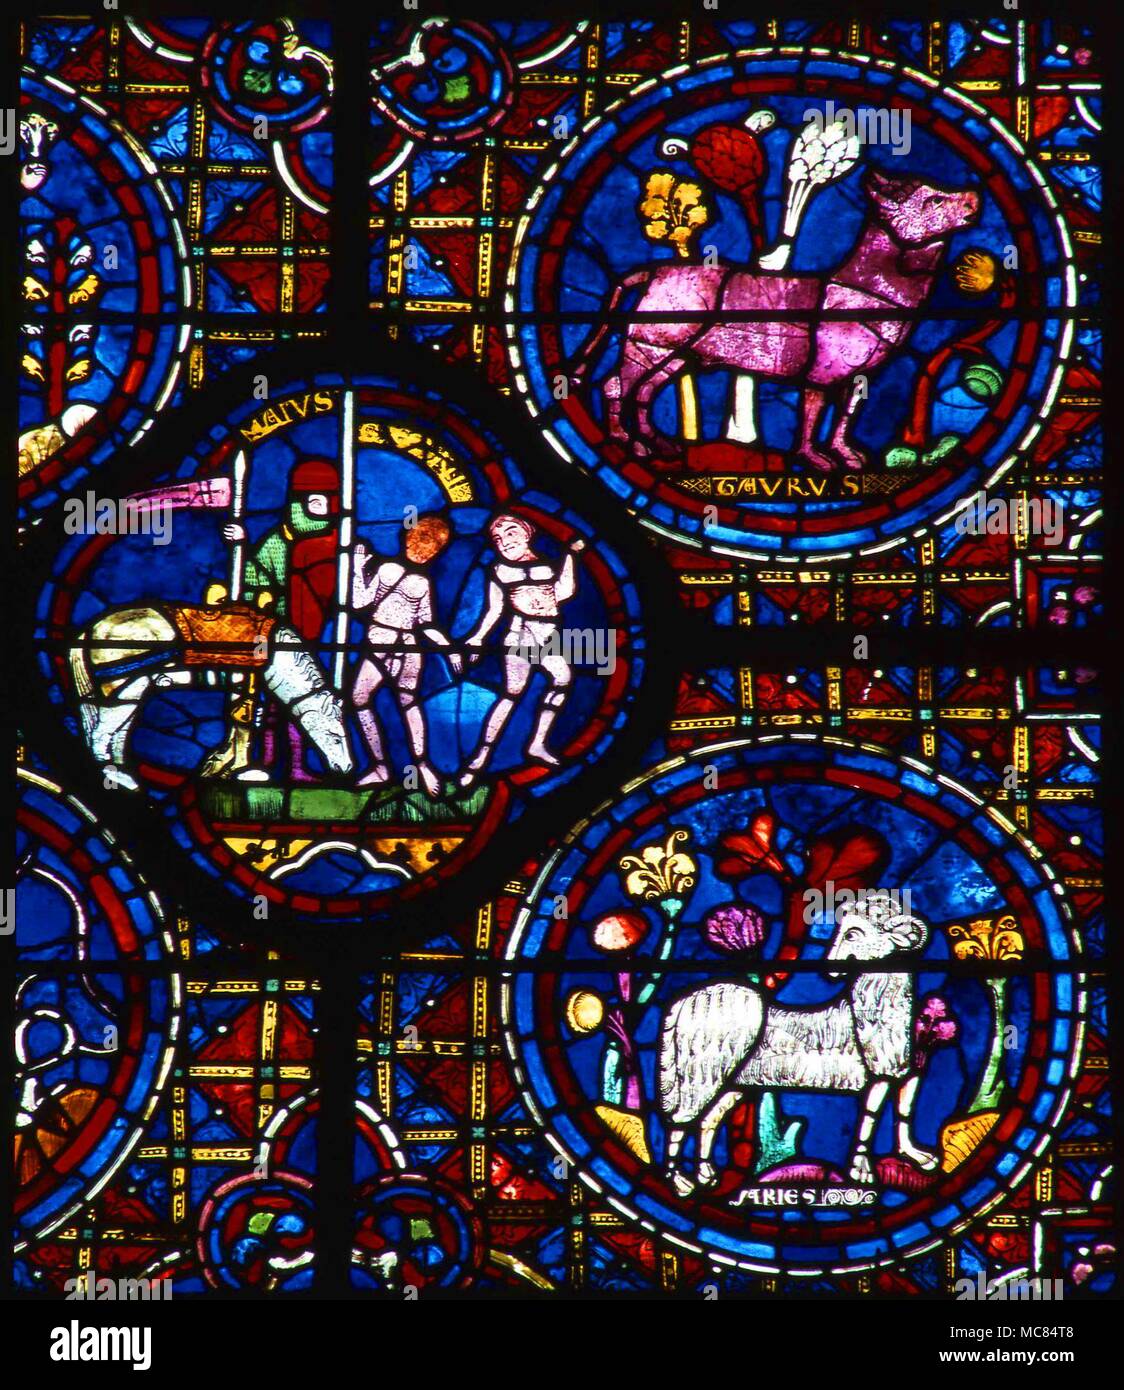 The zodiacal signs, Aries, Taurus and Gemini, alongside an image of the Month of May. Thirteenth century stained glass - detail from the zodiacal window in the south wall of Chartres cathedral. Stock Photo